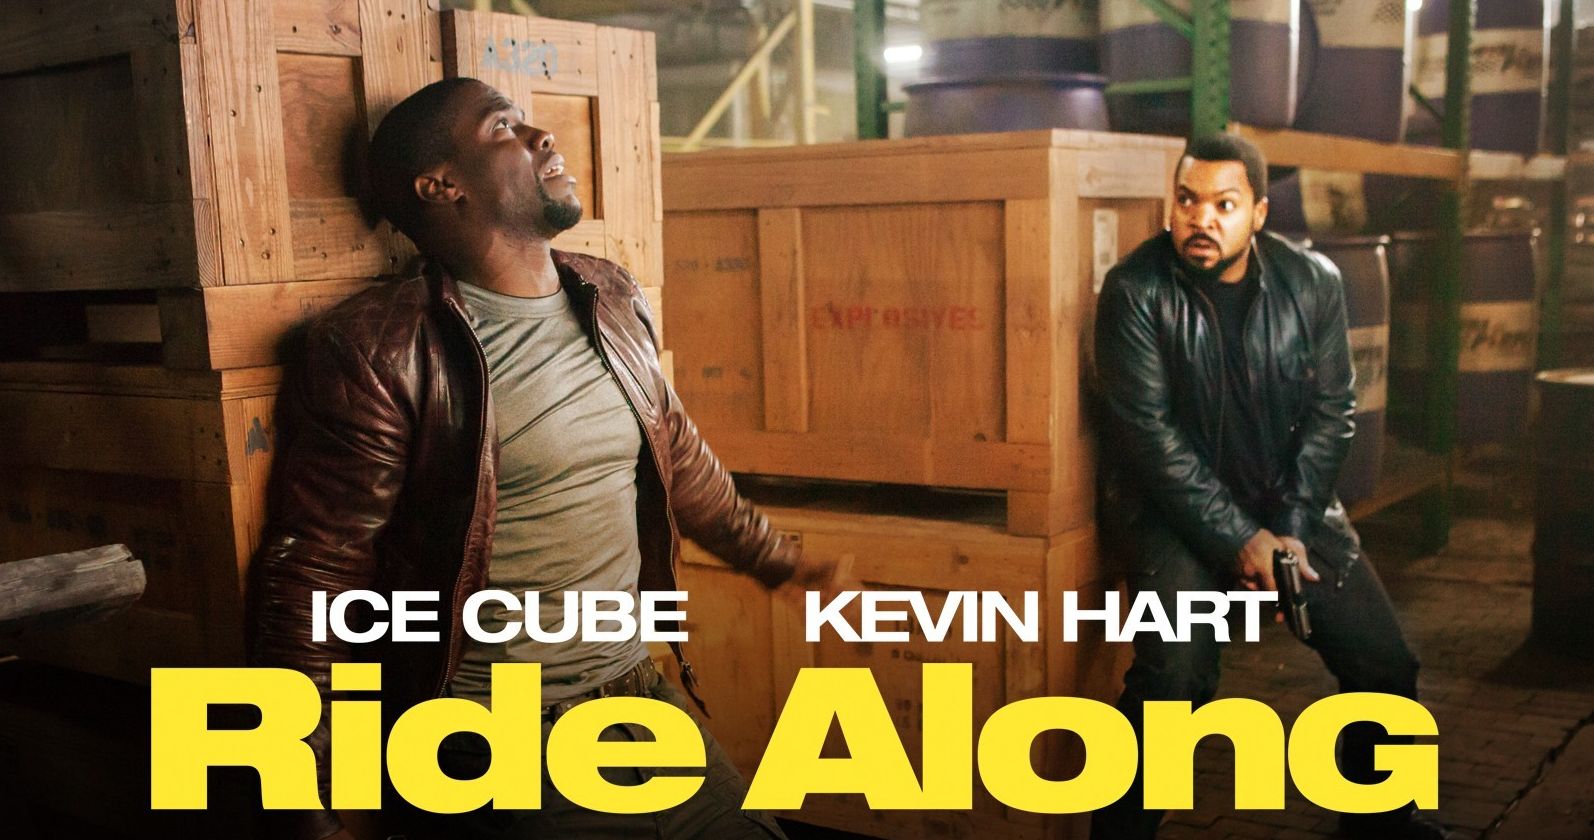 Box Office: Ride Along retains #1 spot while I, Frankenstein bombs!